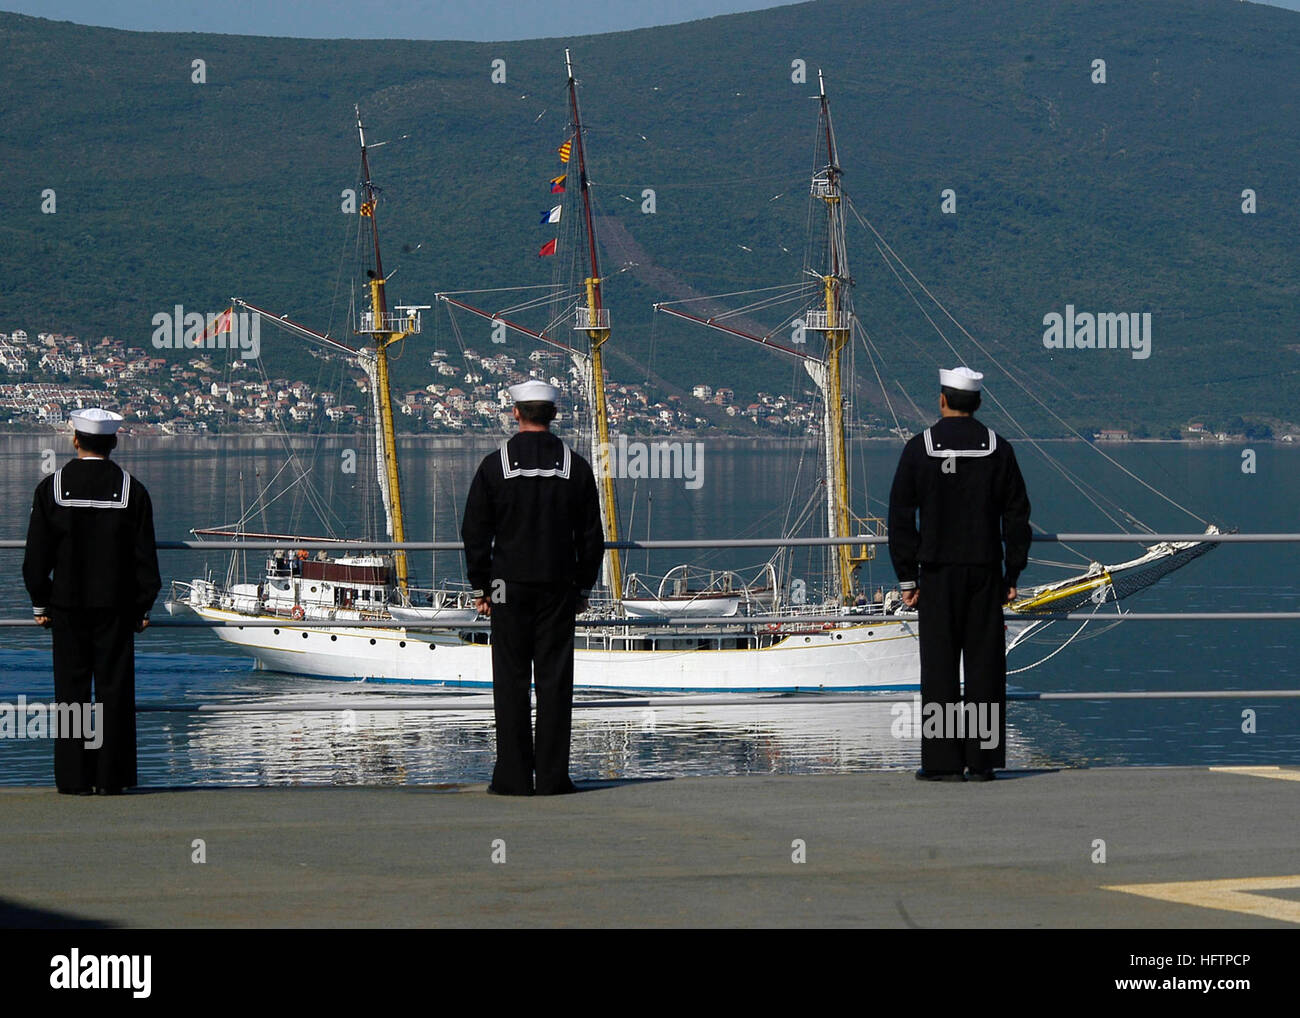 070525-N-2566U-002 TIVAT, Montenegro (May 25, 2007) Ð Sailors on board USS Emory S. Land (AS 39) man the rails as Montenegrin training vessel Jadran sails in the background. Emory S. Land is the third U.S. Navy ship to visit Montenegro since the United States began diplomatic relations with the country in August 2006. U.S. Navy photo by Mass Communication Specialist 2nd Class Jesus Uranga (RELEASED) US Navy 070525-N-2566U-002 Sailors on board USS Emory S. Land (AS 39) man the rails as Montenegrin training vessel Jadran sails in the background Stock Photo